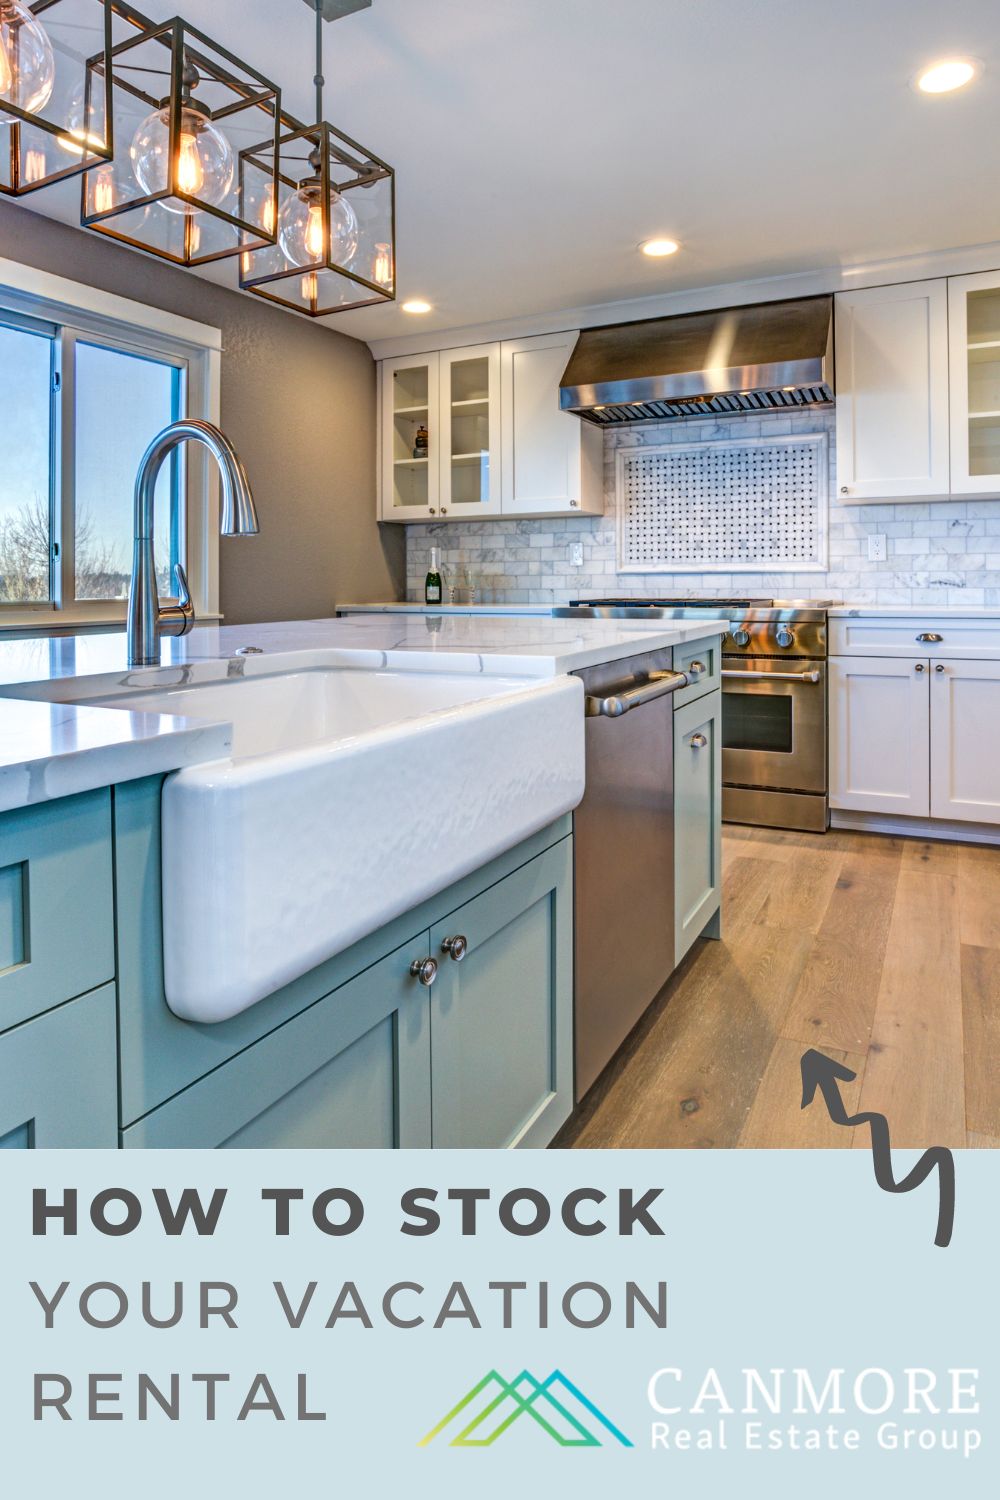 How to Stock Your Vacation Rental